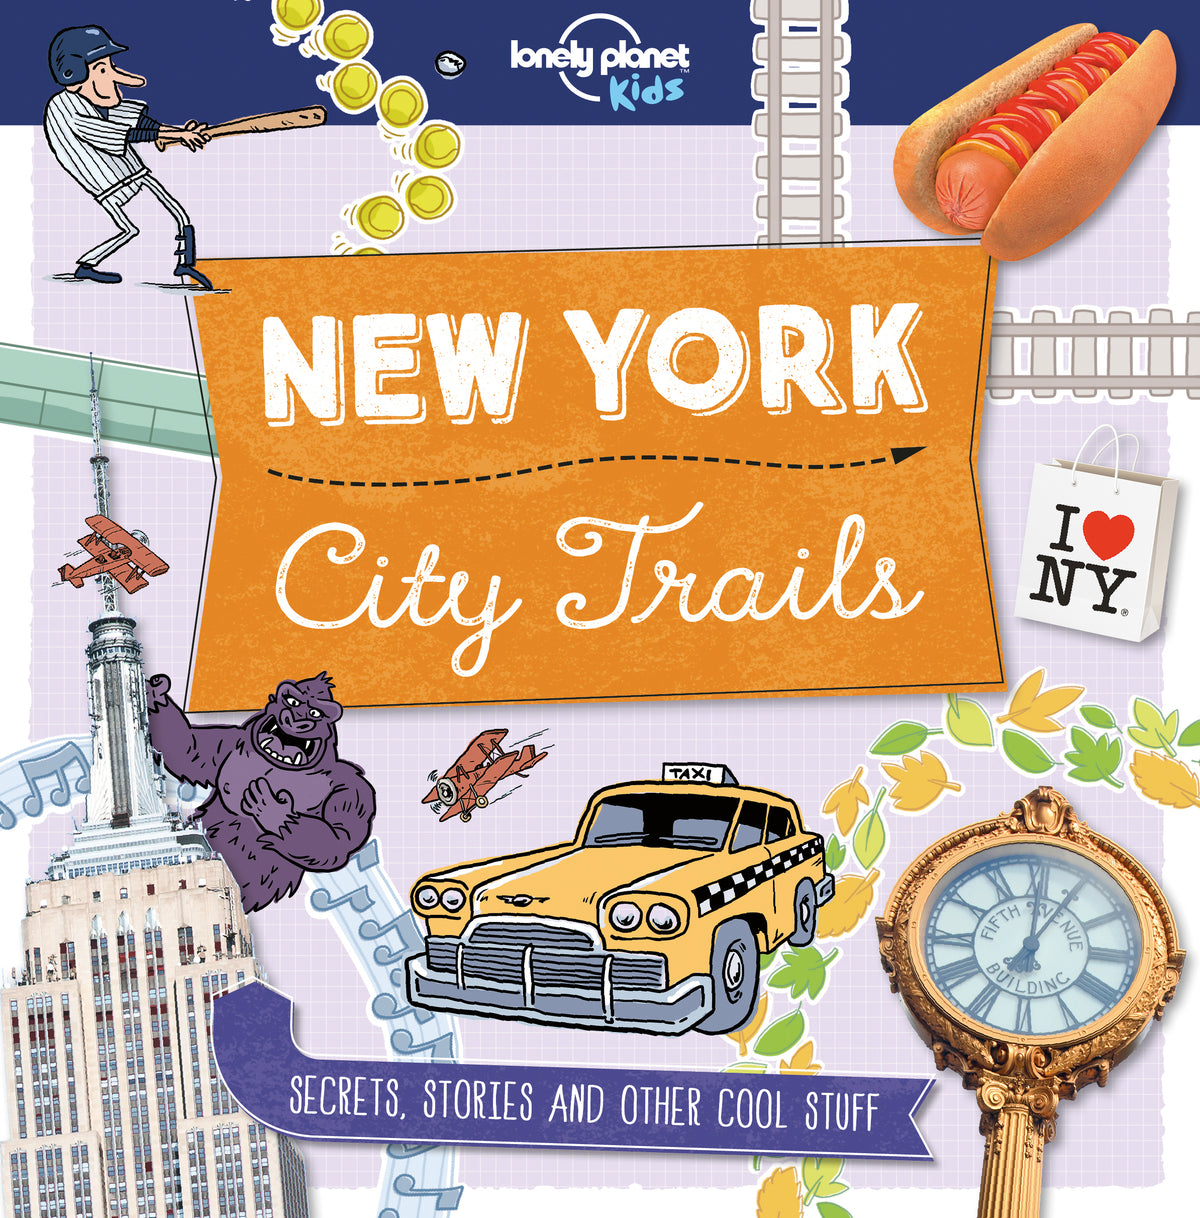 City Trails: New York (North and South America edition)